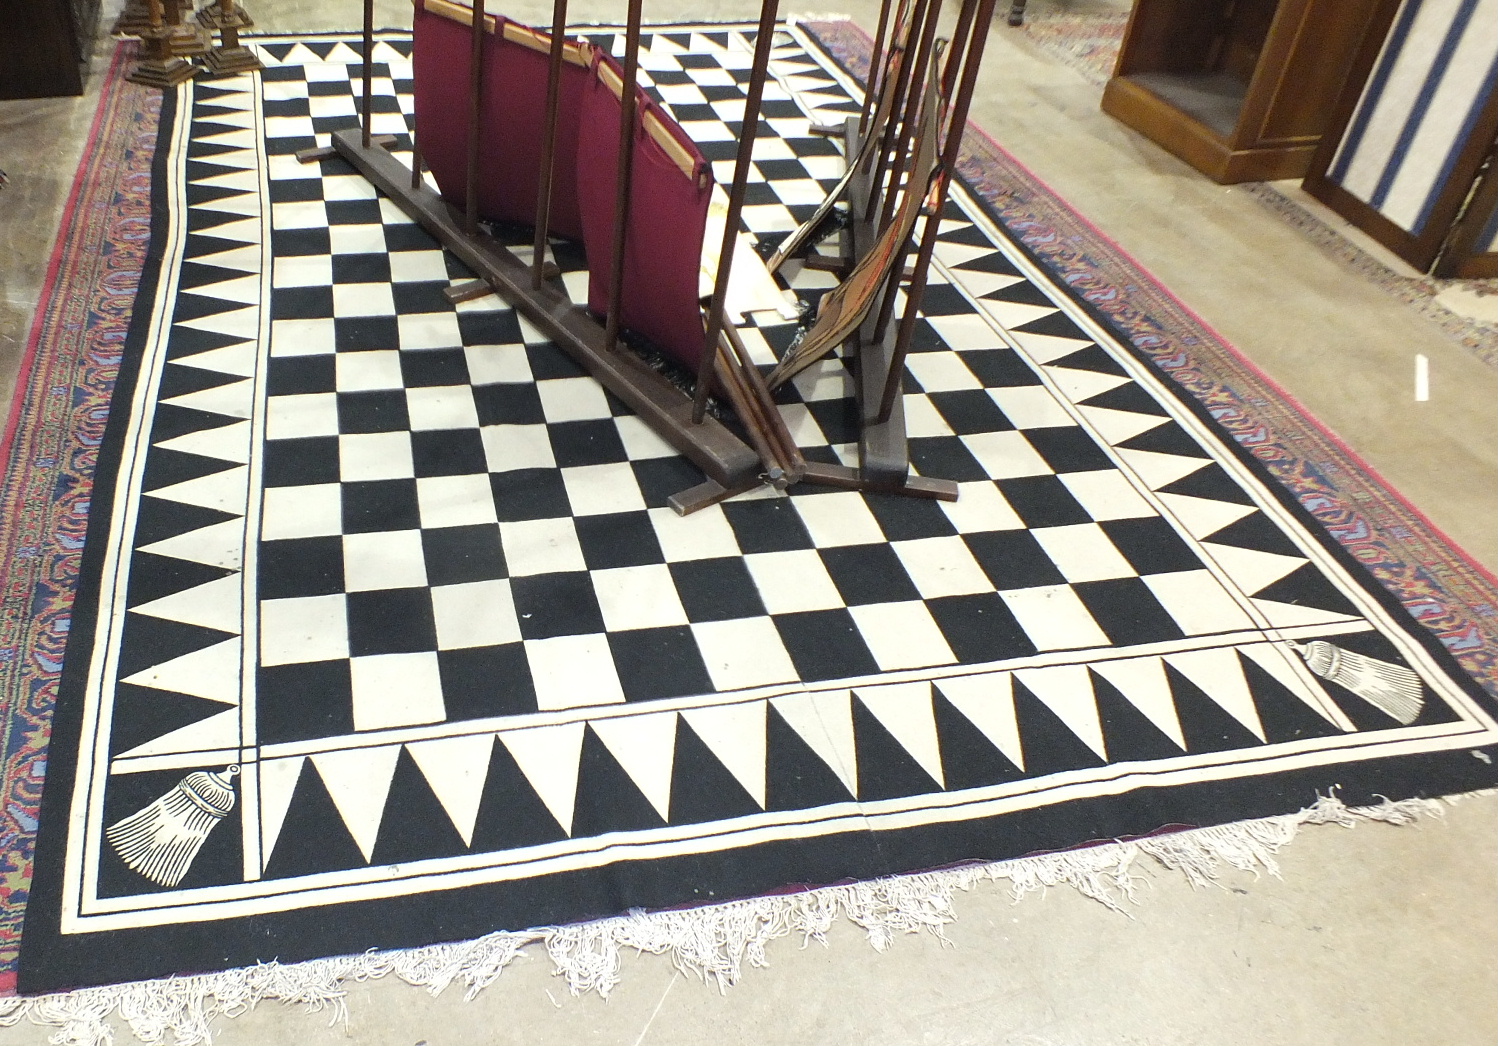 An HRA black and white chequered carpet, 256 x 365cm. - Image 2 of 2